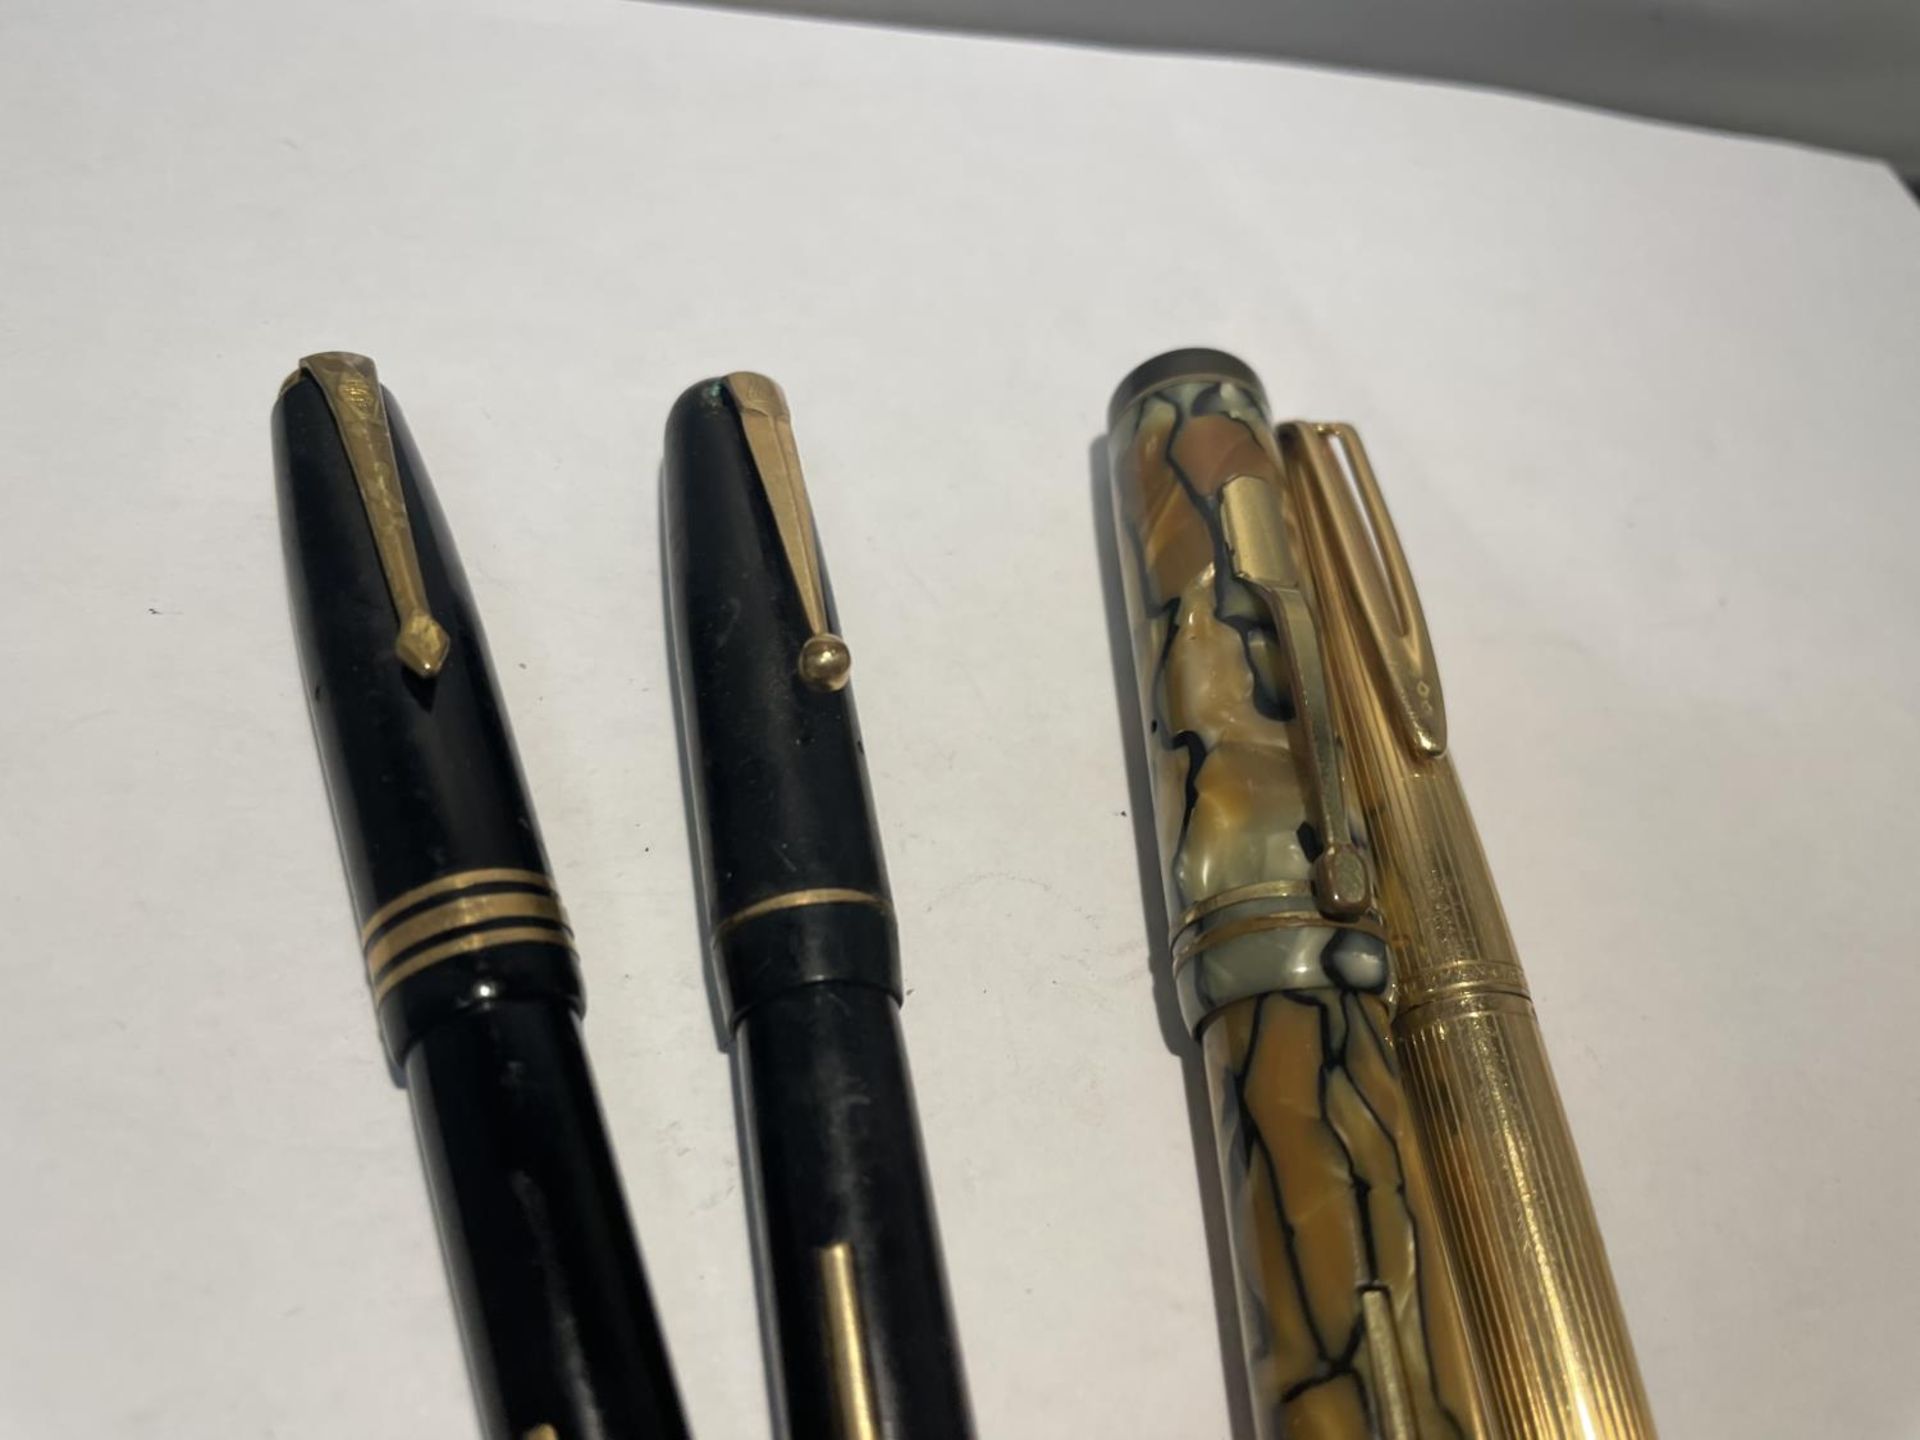 FOUR VINTAGE FOUNTAIN PENS - THREE WITH 14 CARAT AND ONE 18 CARAT GOLD NIBS - Image 2 of 3